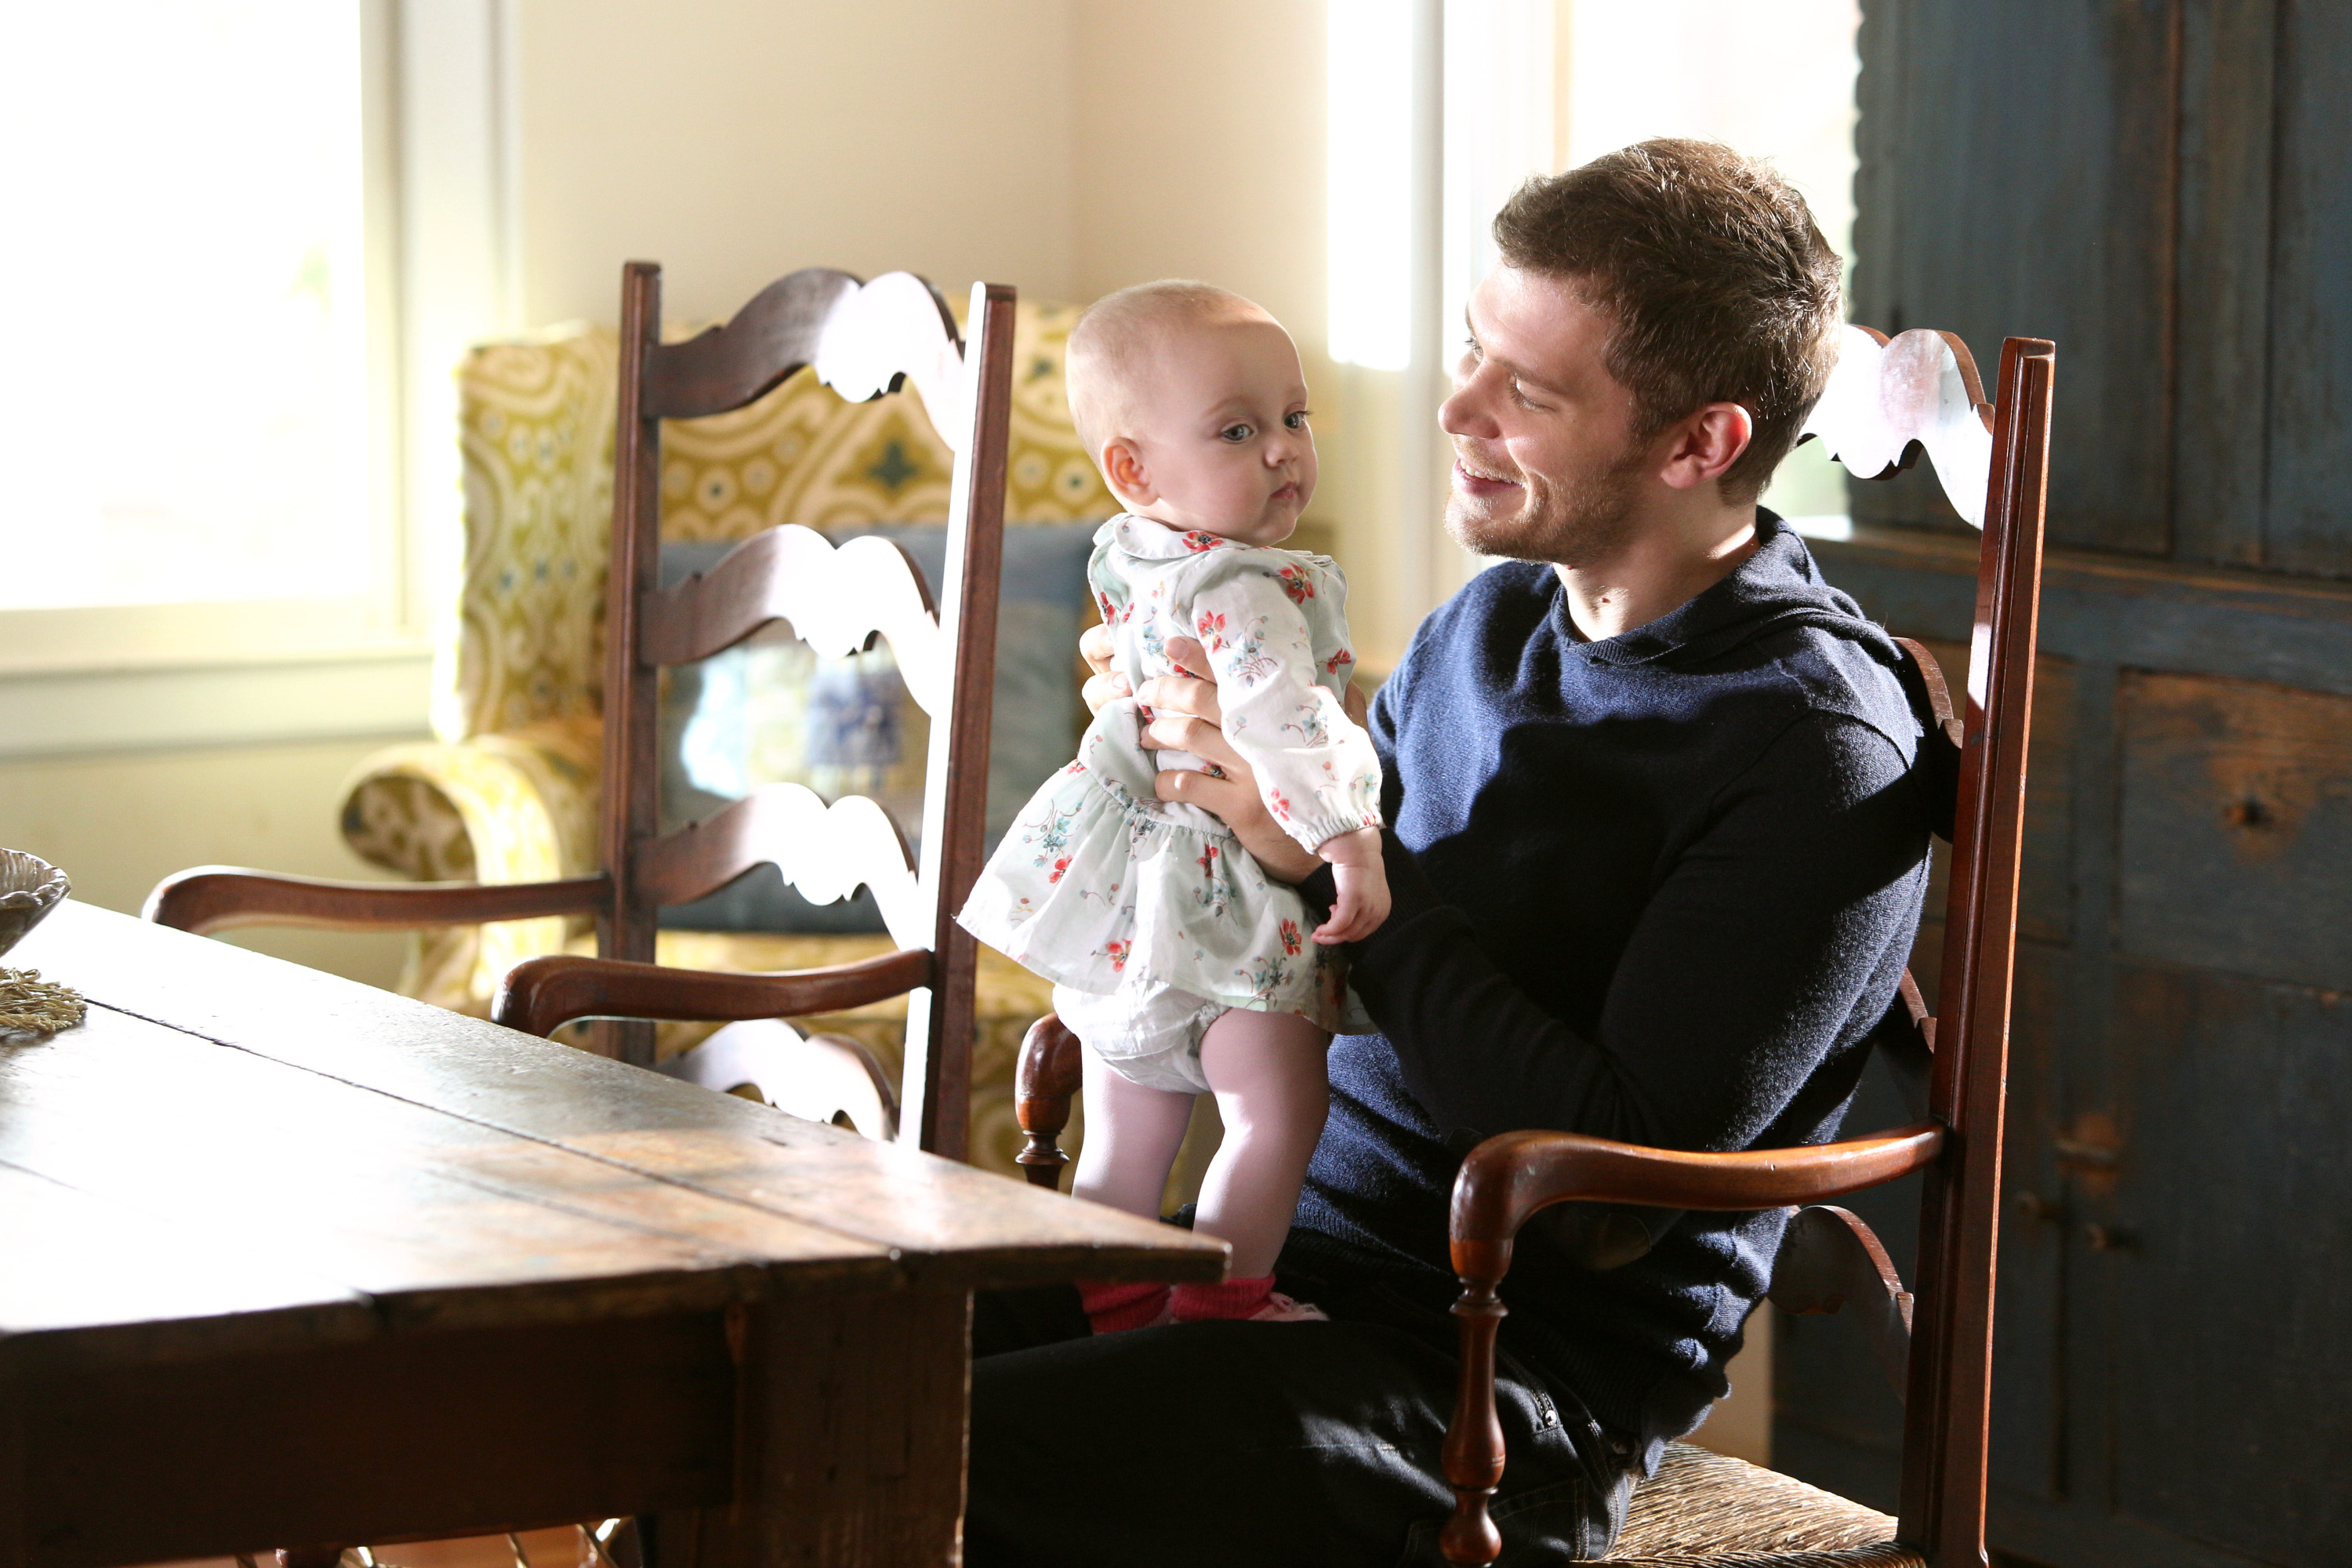 The Originals” Potential Spin-Off Would Center on Klaus and Hayley's  Daughter Hope